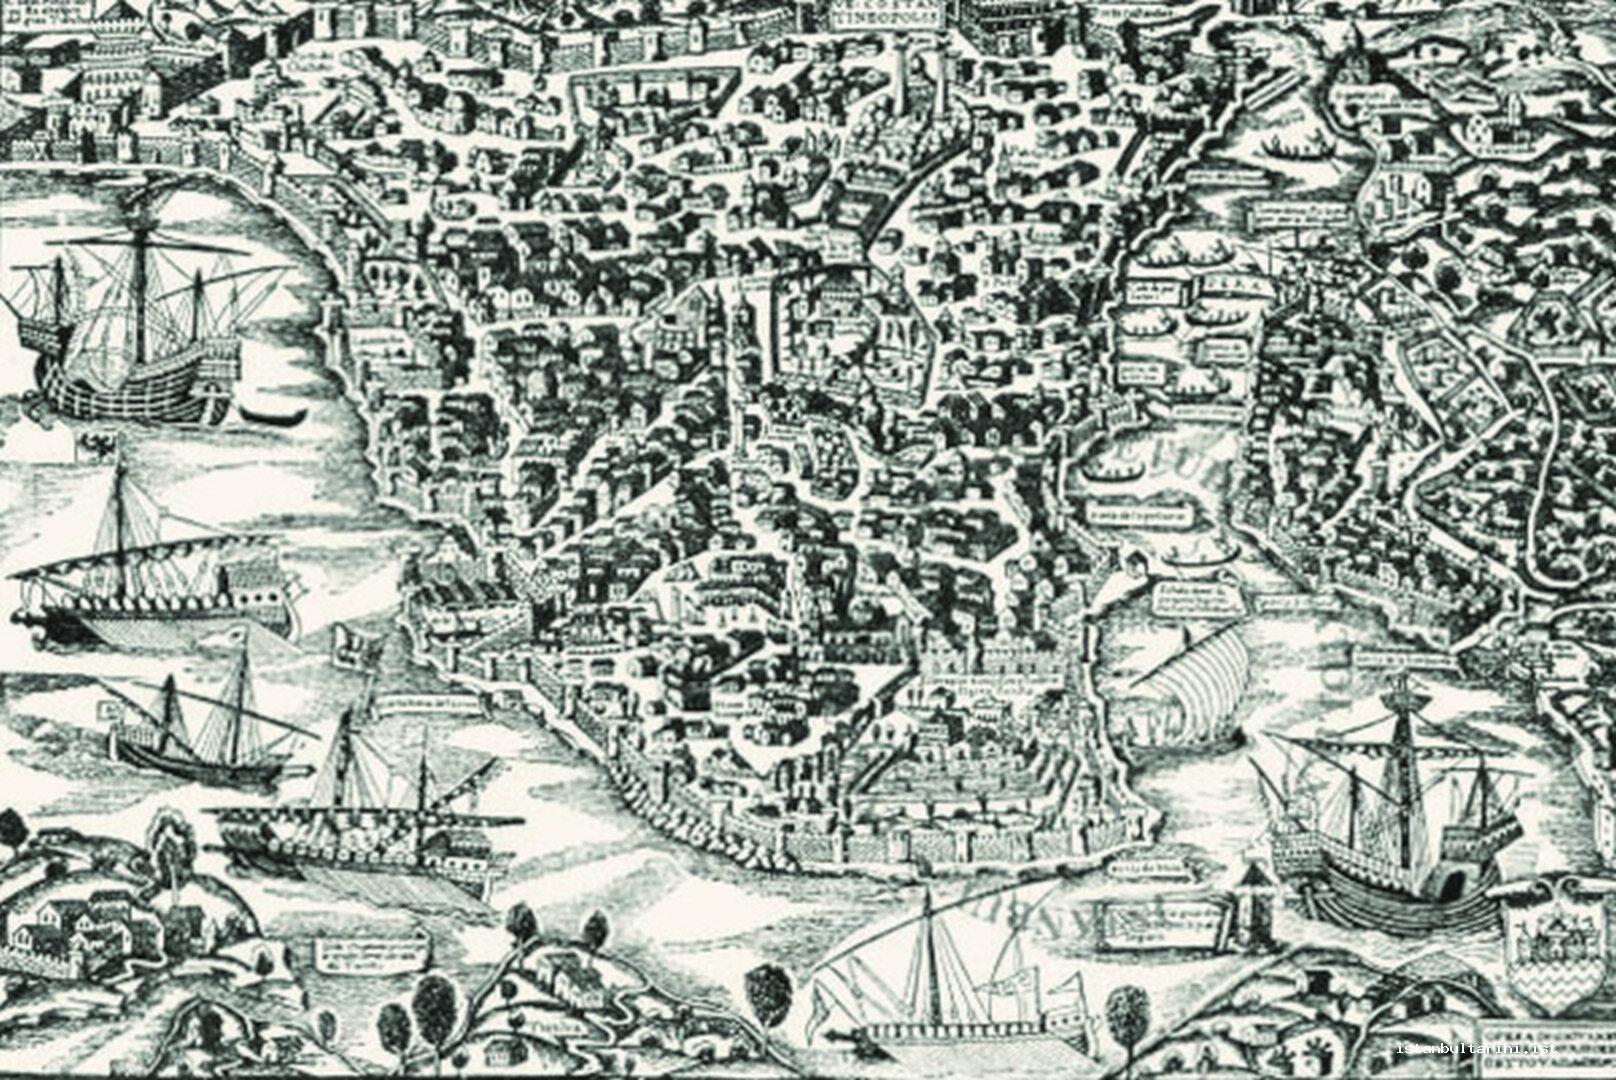 5- A. di Vavassore, an Overview of Istanbul, 1550